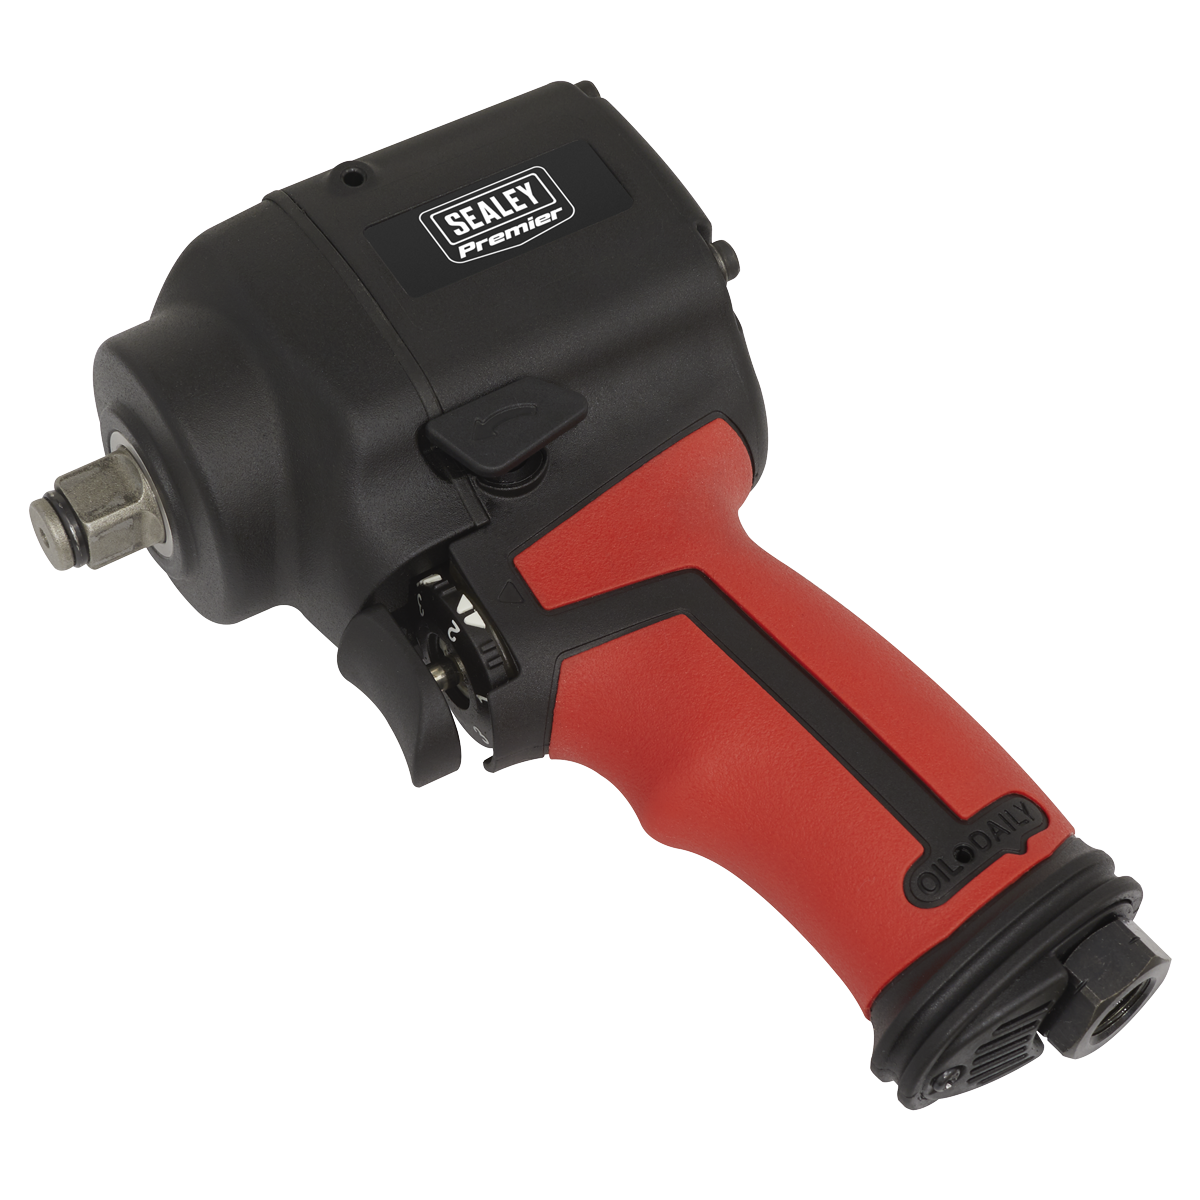 Sealey Air Impact Wrench 1/2"Sq Drive Stubby - Twin Hammer